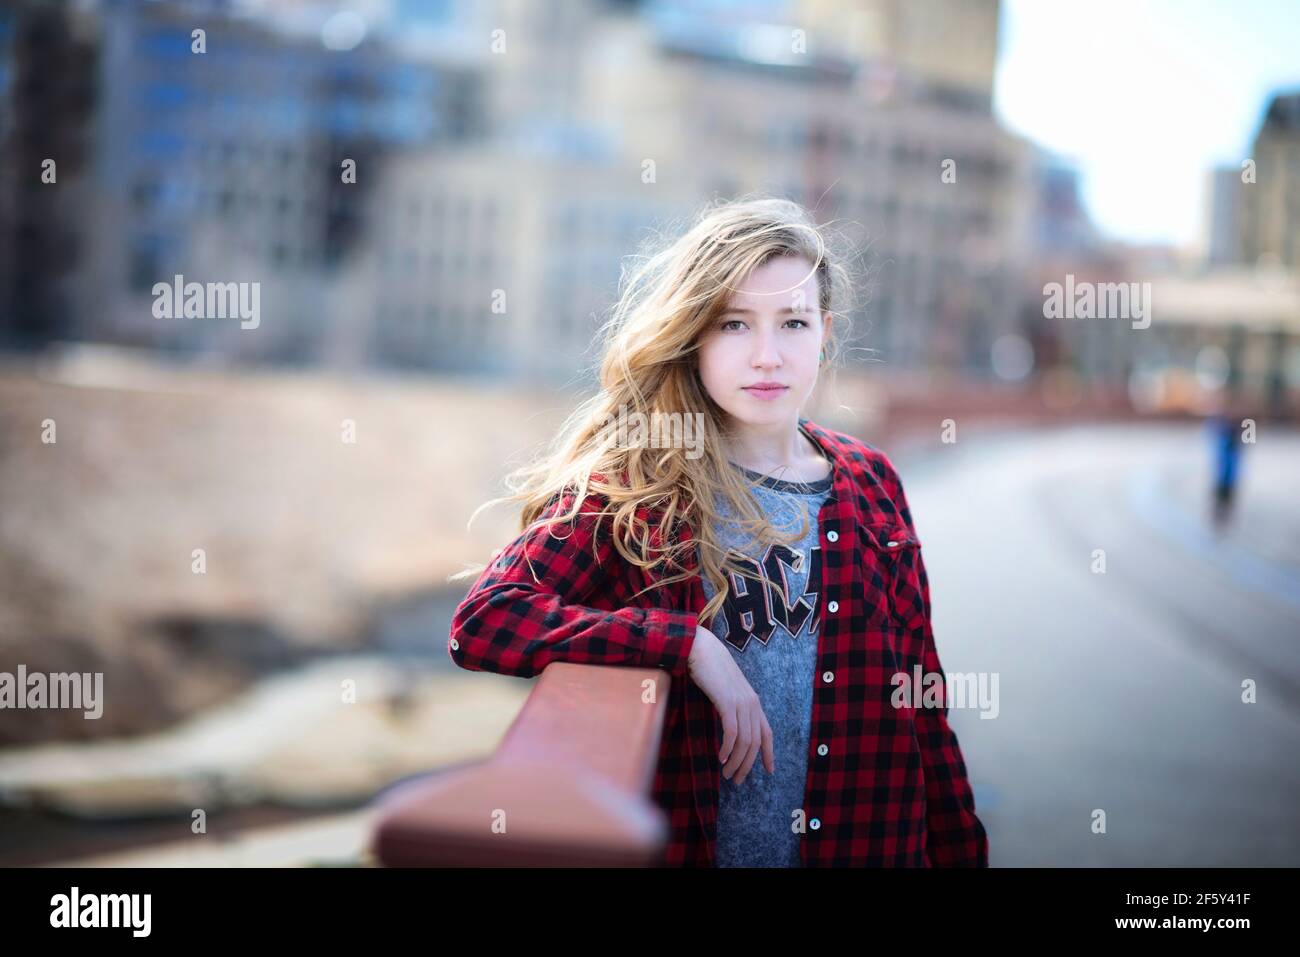 Teen girl with long hair standing in urban setting. Stock Photo